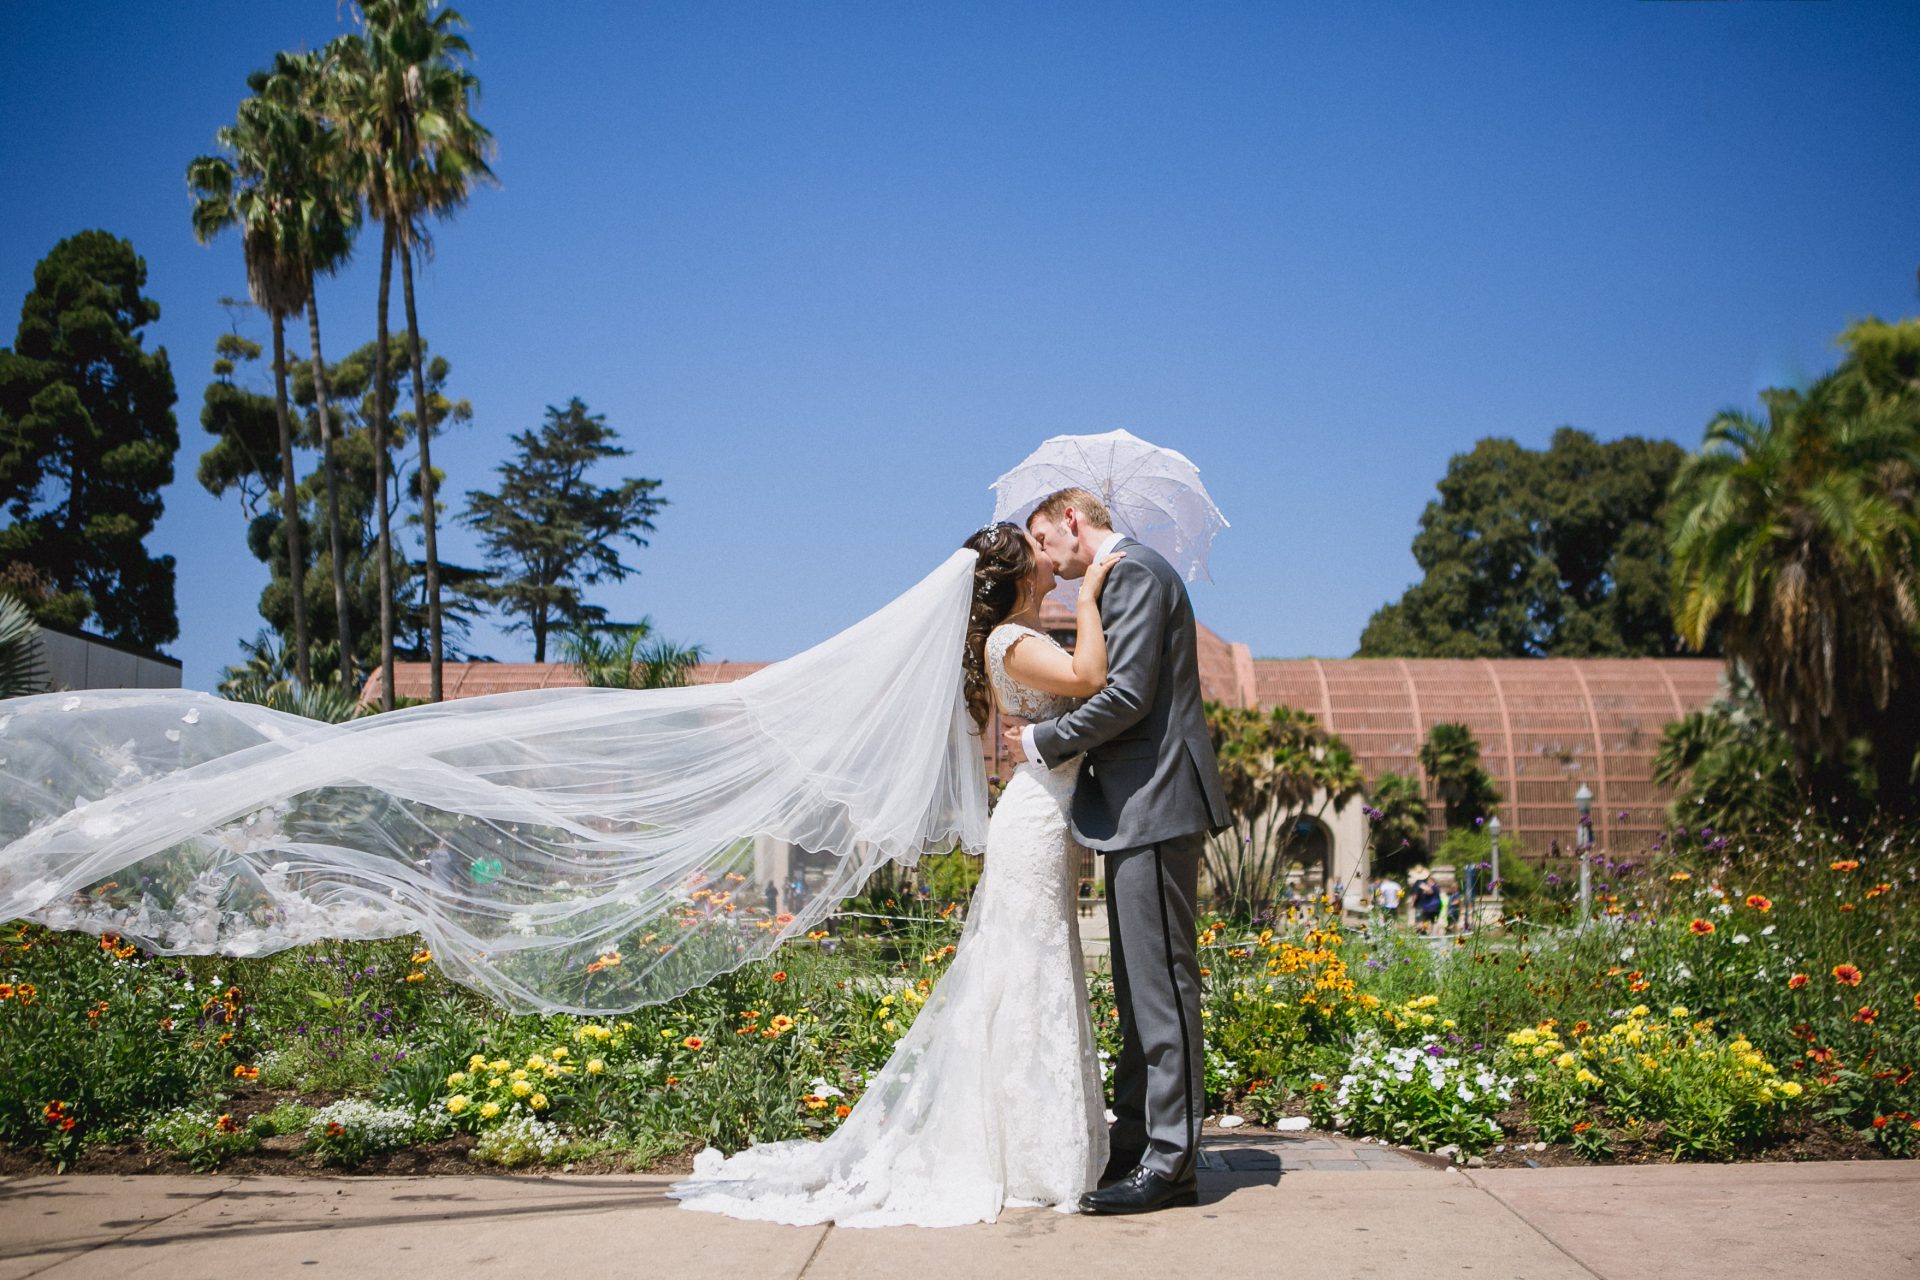 Learn How to Choose A Wedding Veil - All You Need To Know!